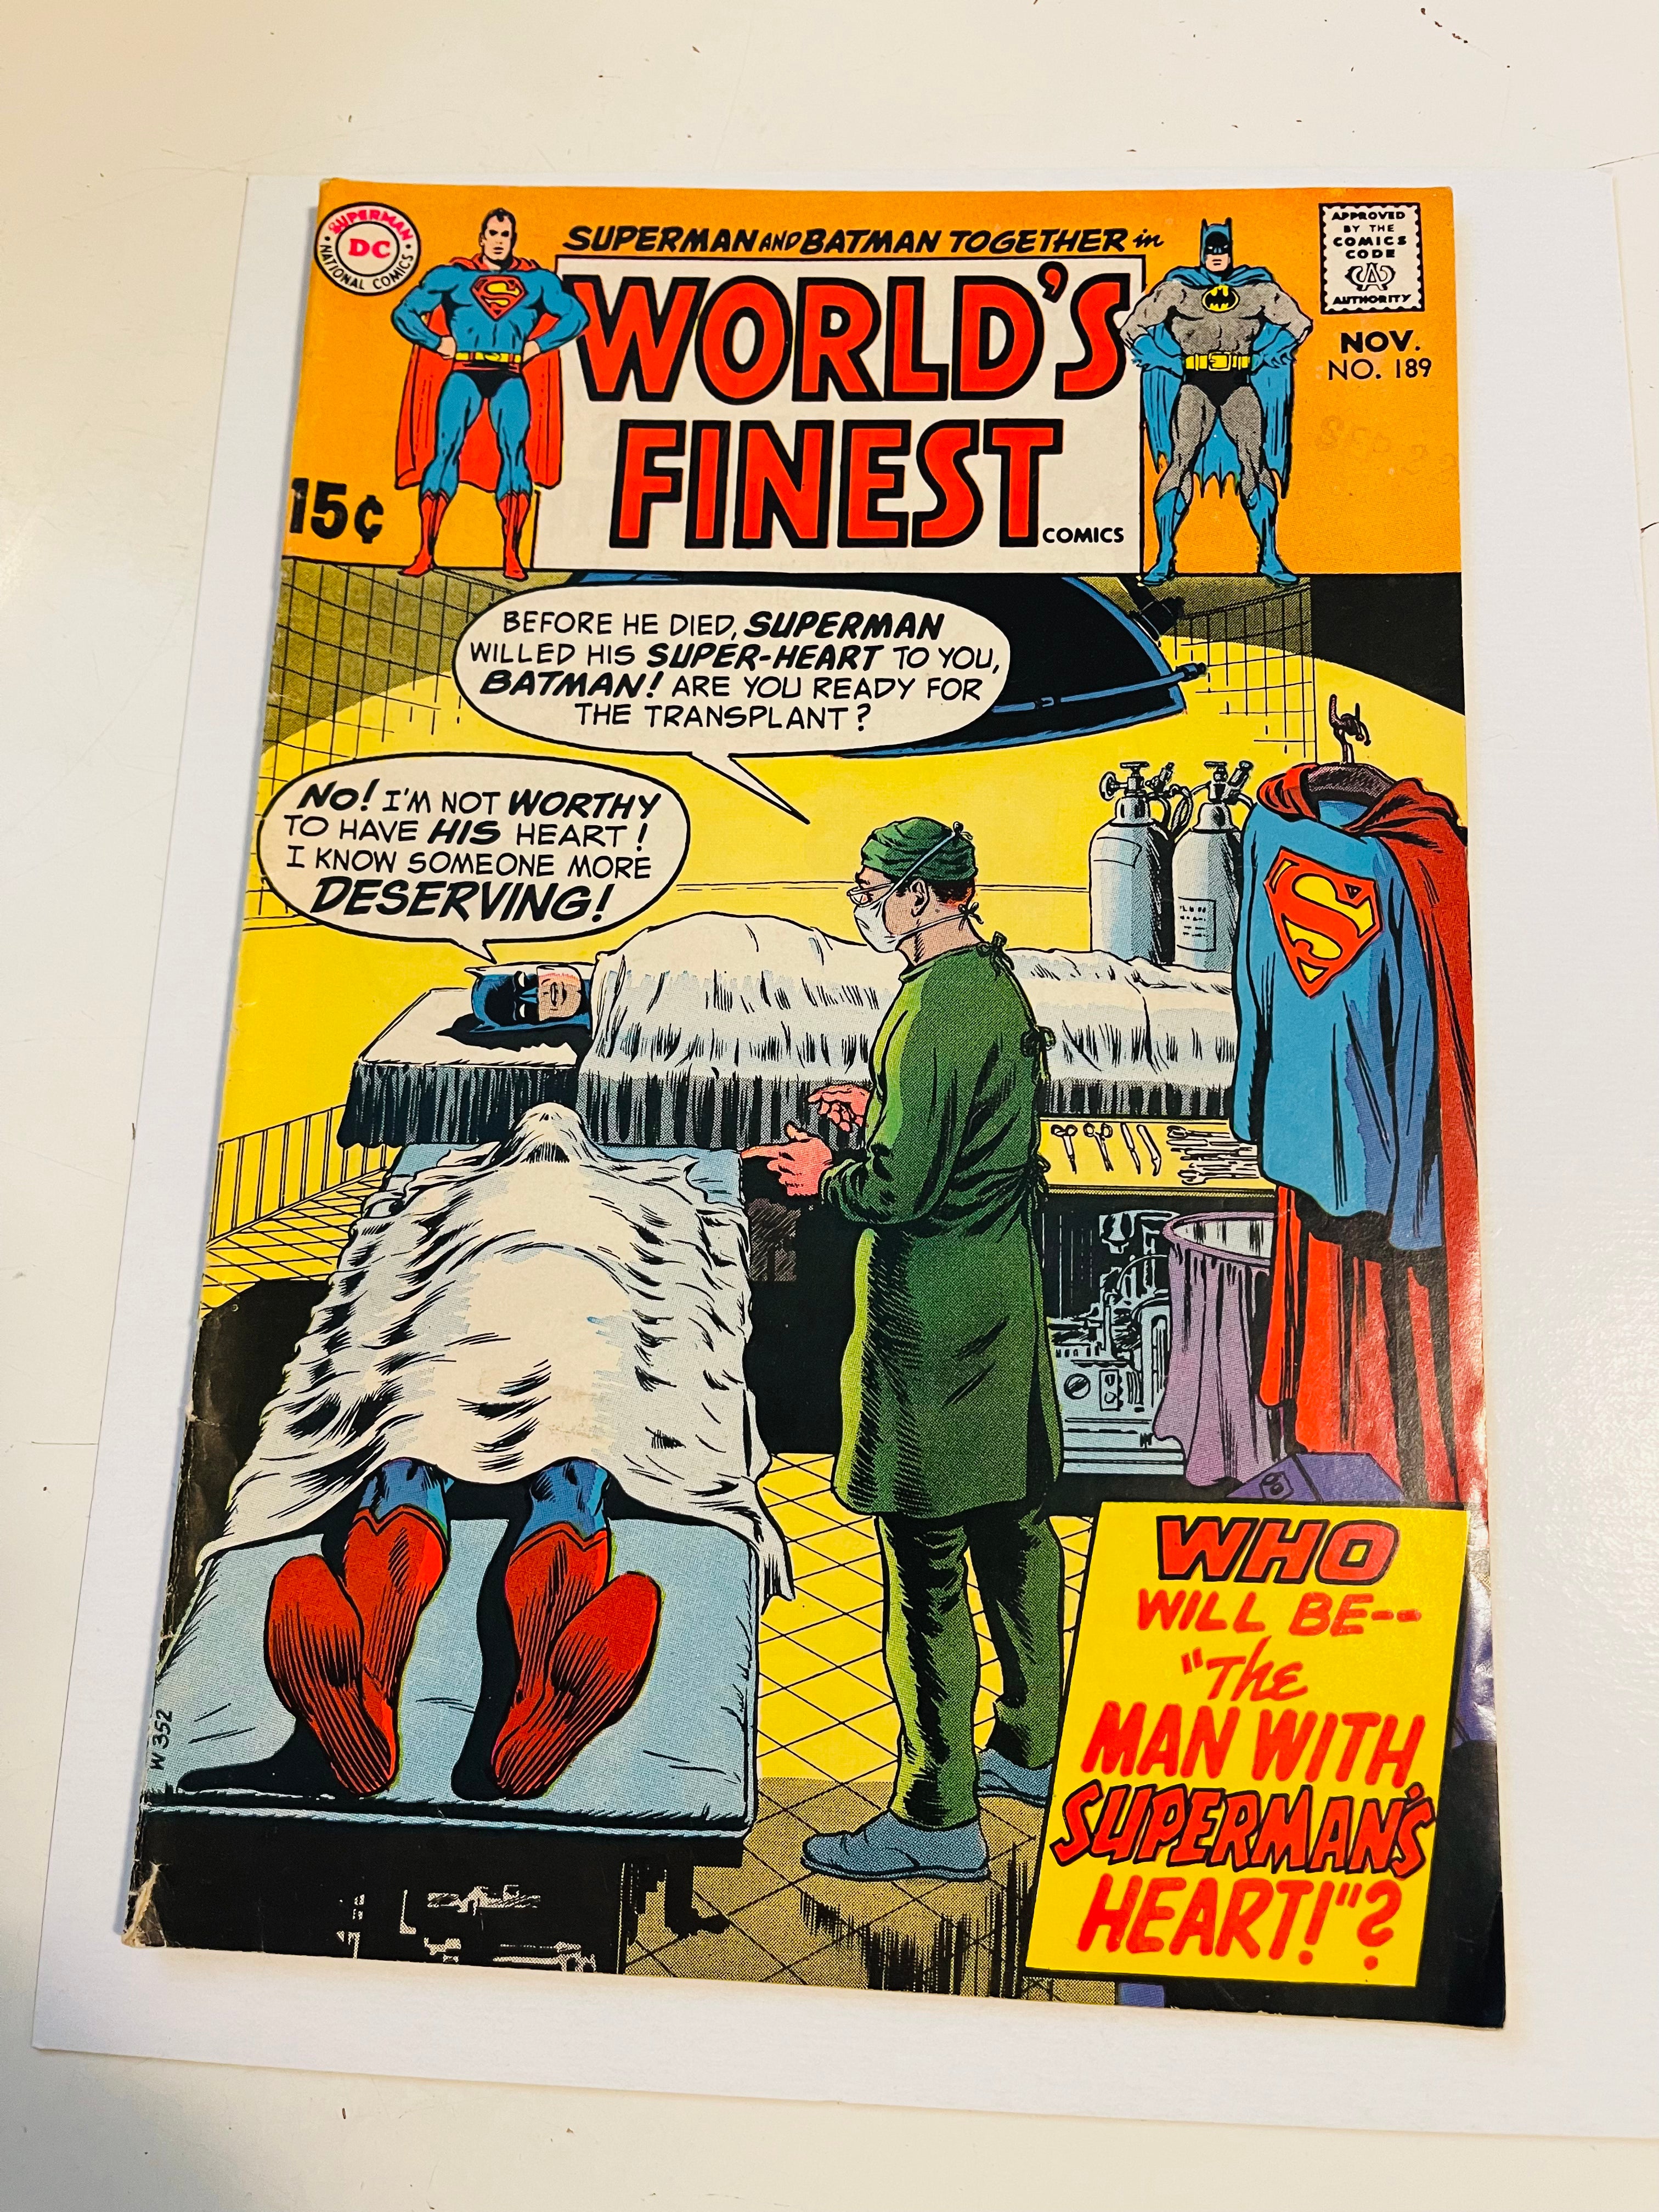 World’s Finest comic #189 vg condition 1969